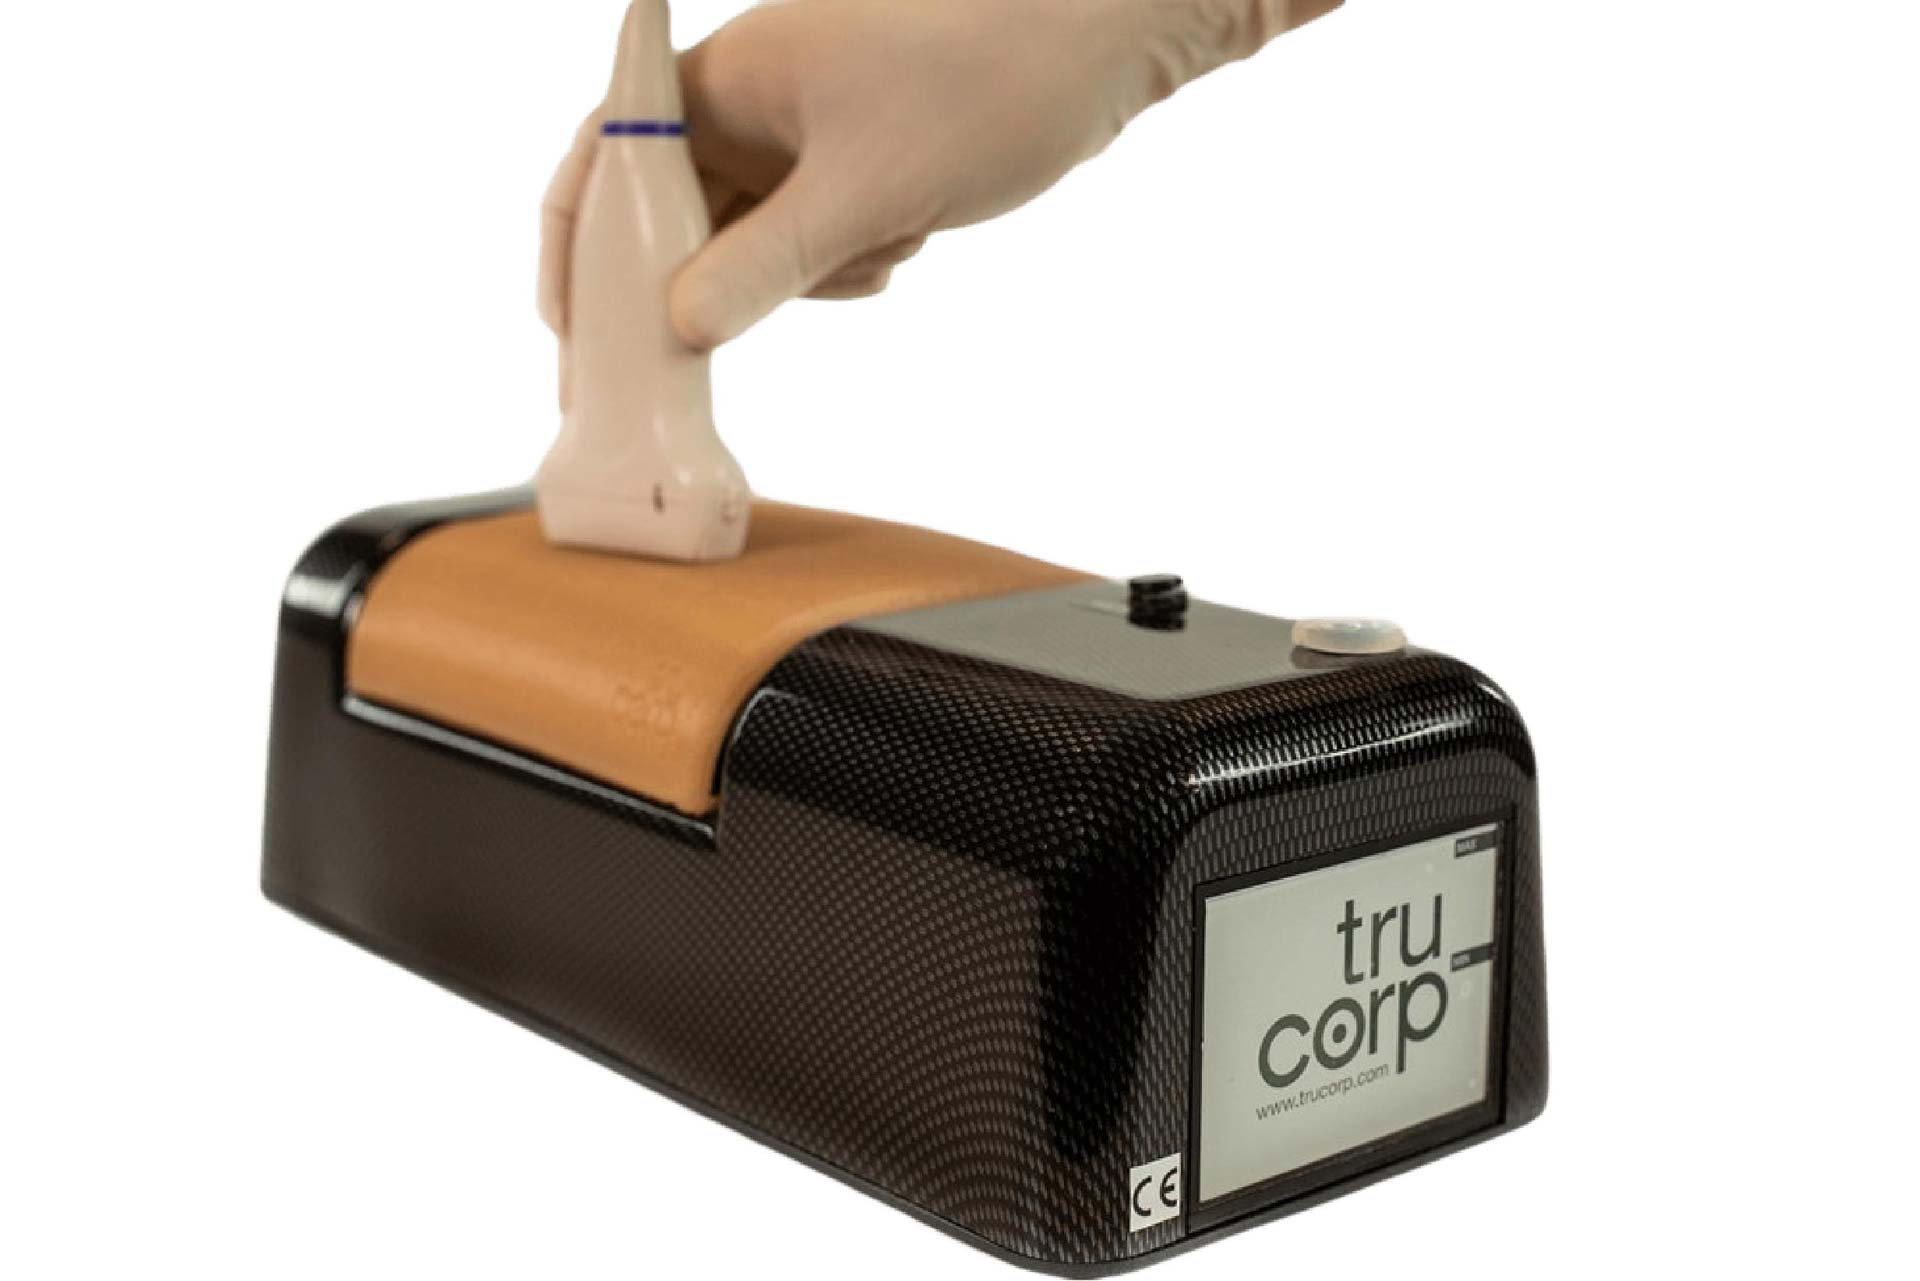 Ultrasound trainers